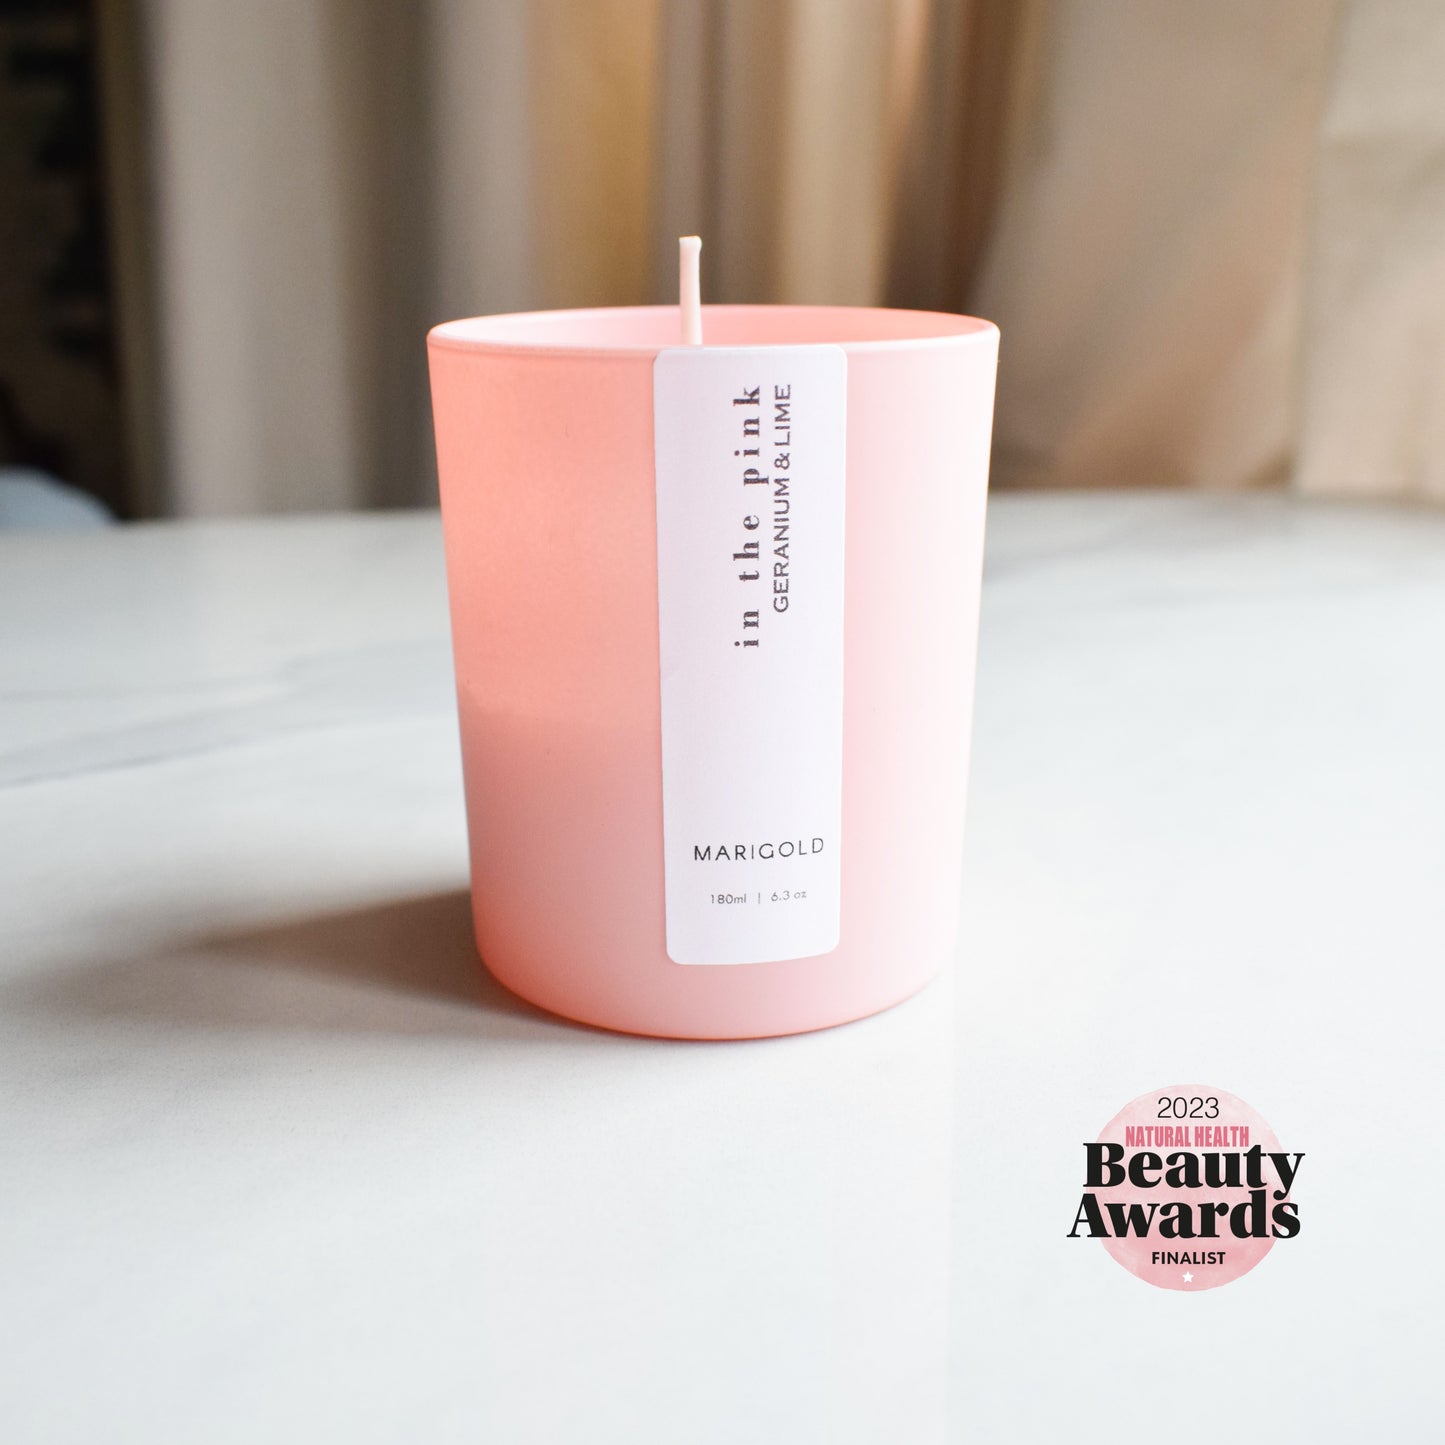 In the Pink Wellbeing Aromatherapy Candle